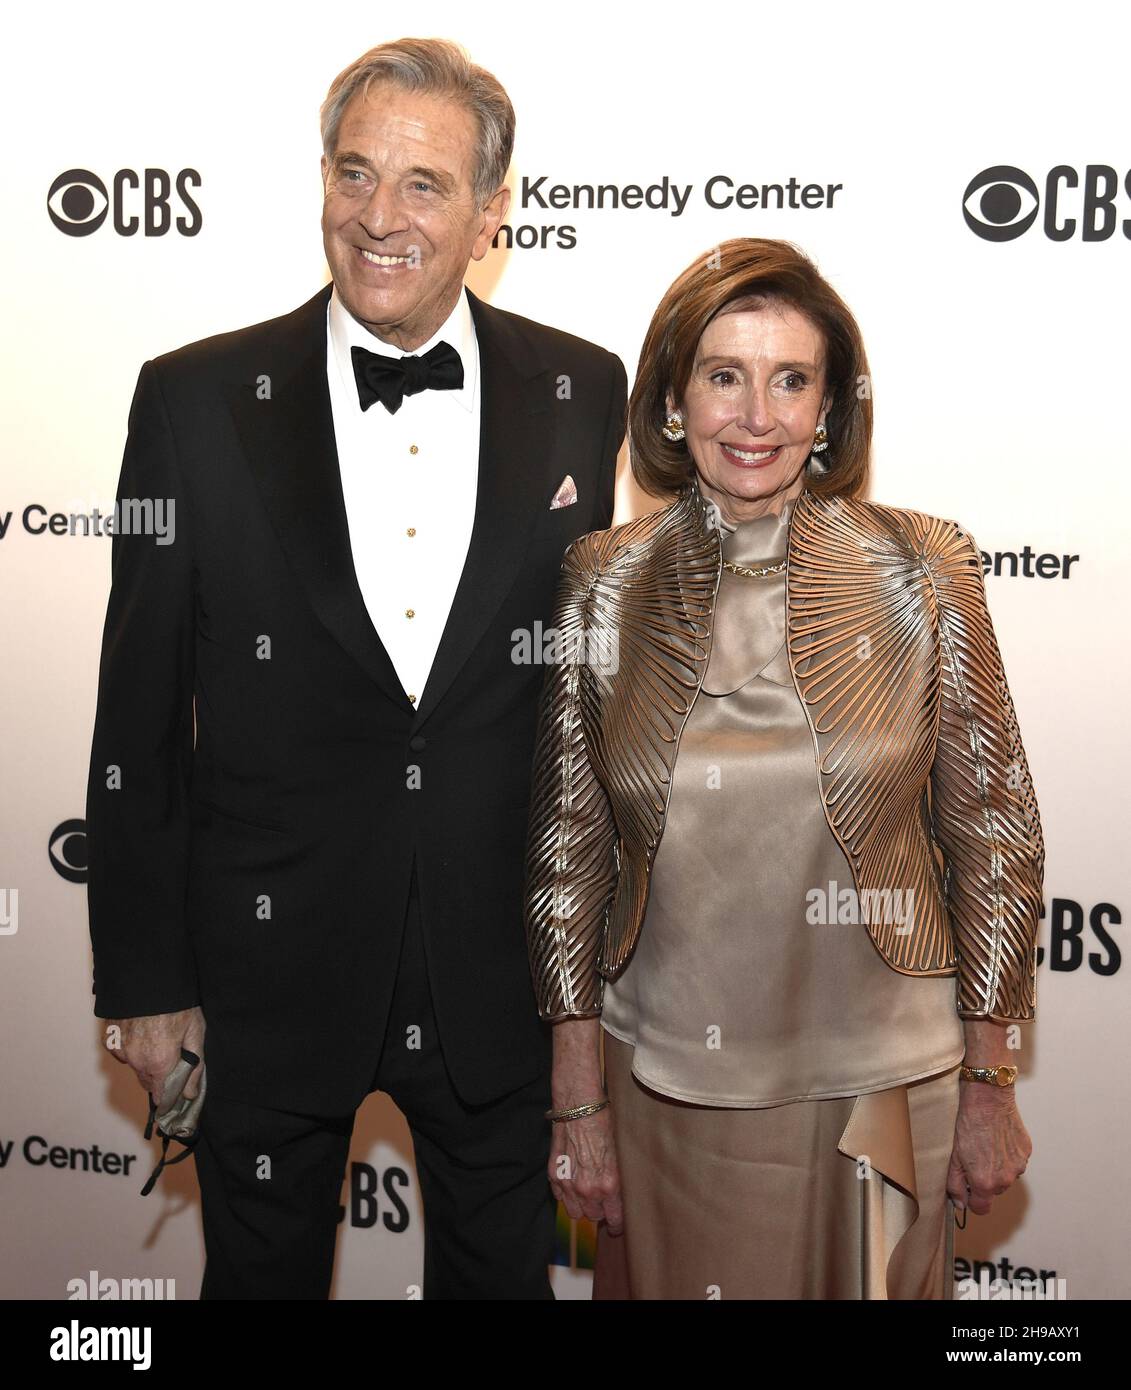 Washington, United States. 05th Dec, 2021. House Speaker Nancy Pelosi (D-CA) and husband Paul pose for photographers as they arrive for the 2021 Kennedy Center Honors gala evening in Washington, Sunday, December 5, 2021. The Honors are given annually to those in the performing arts for their lifetime of contributions to American culture. Photo by Mike Theiler/UPI Credit: UPI/Alamy Live News Stock Photo